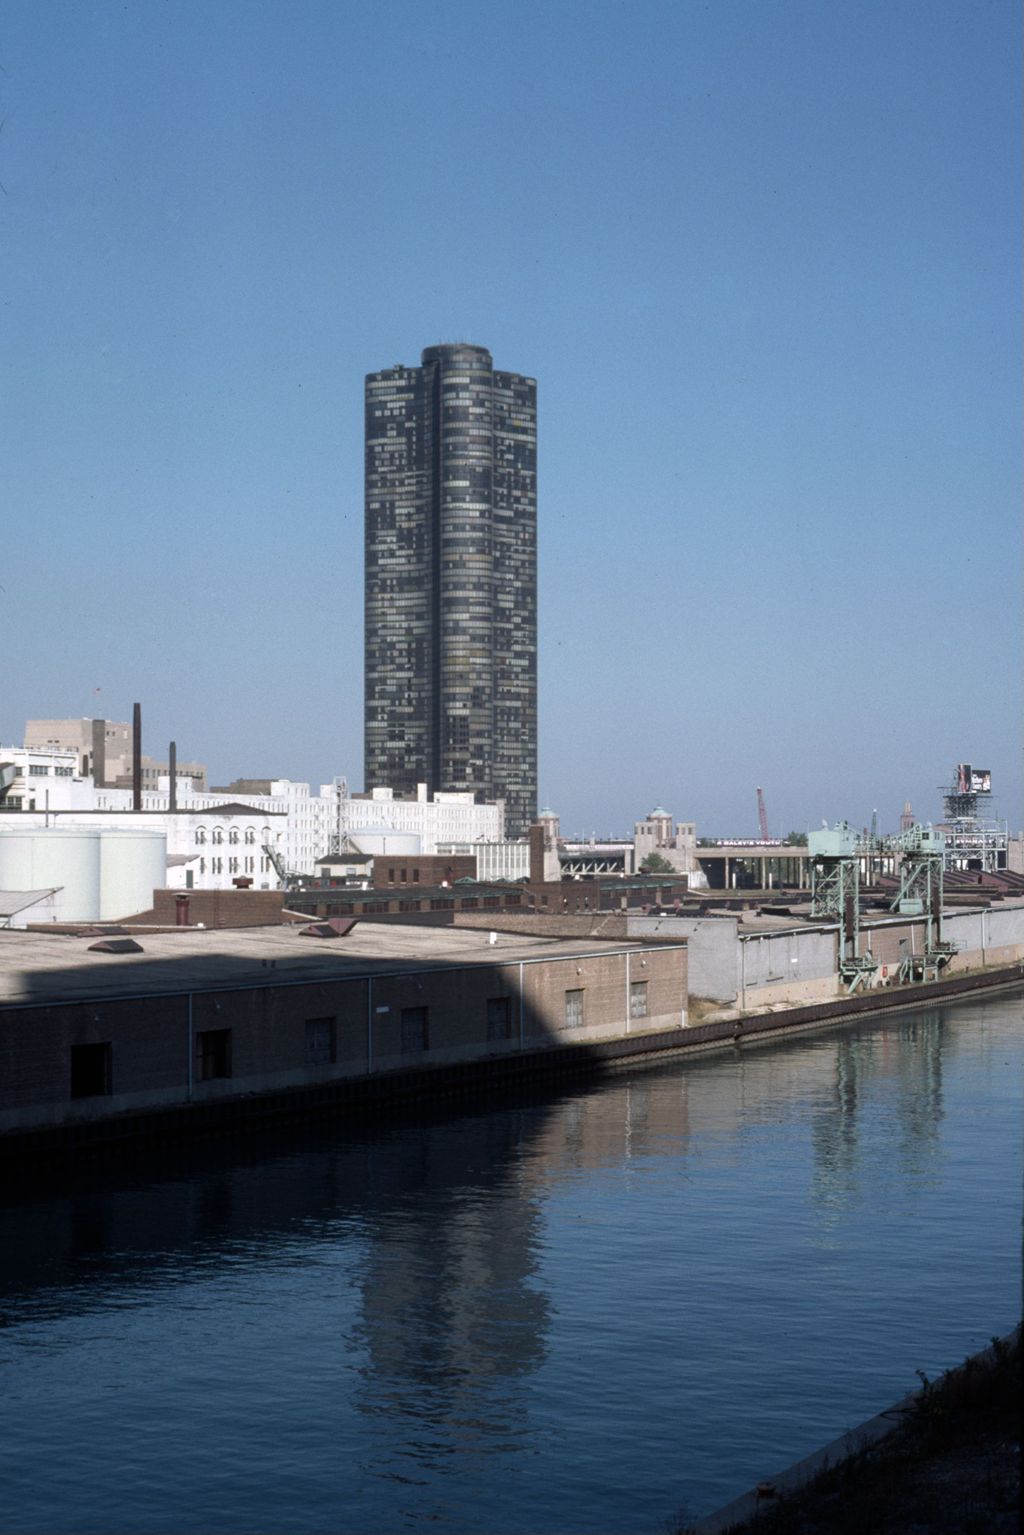 Lake Point Tower and industrial buildings along the Chicago River